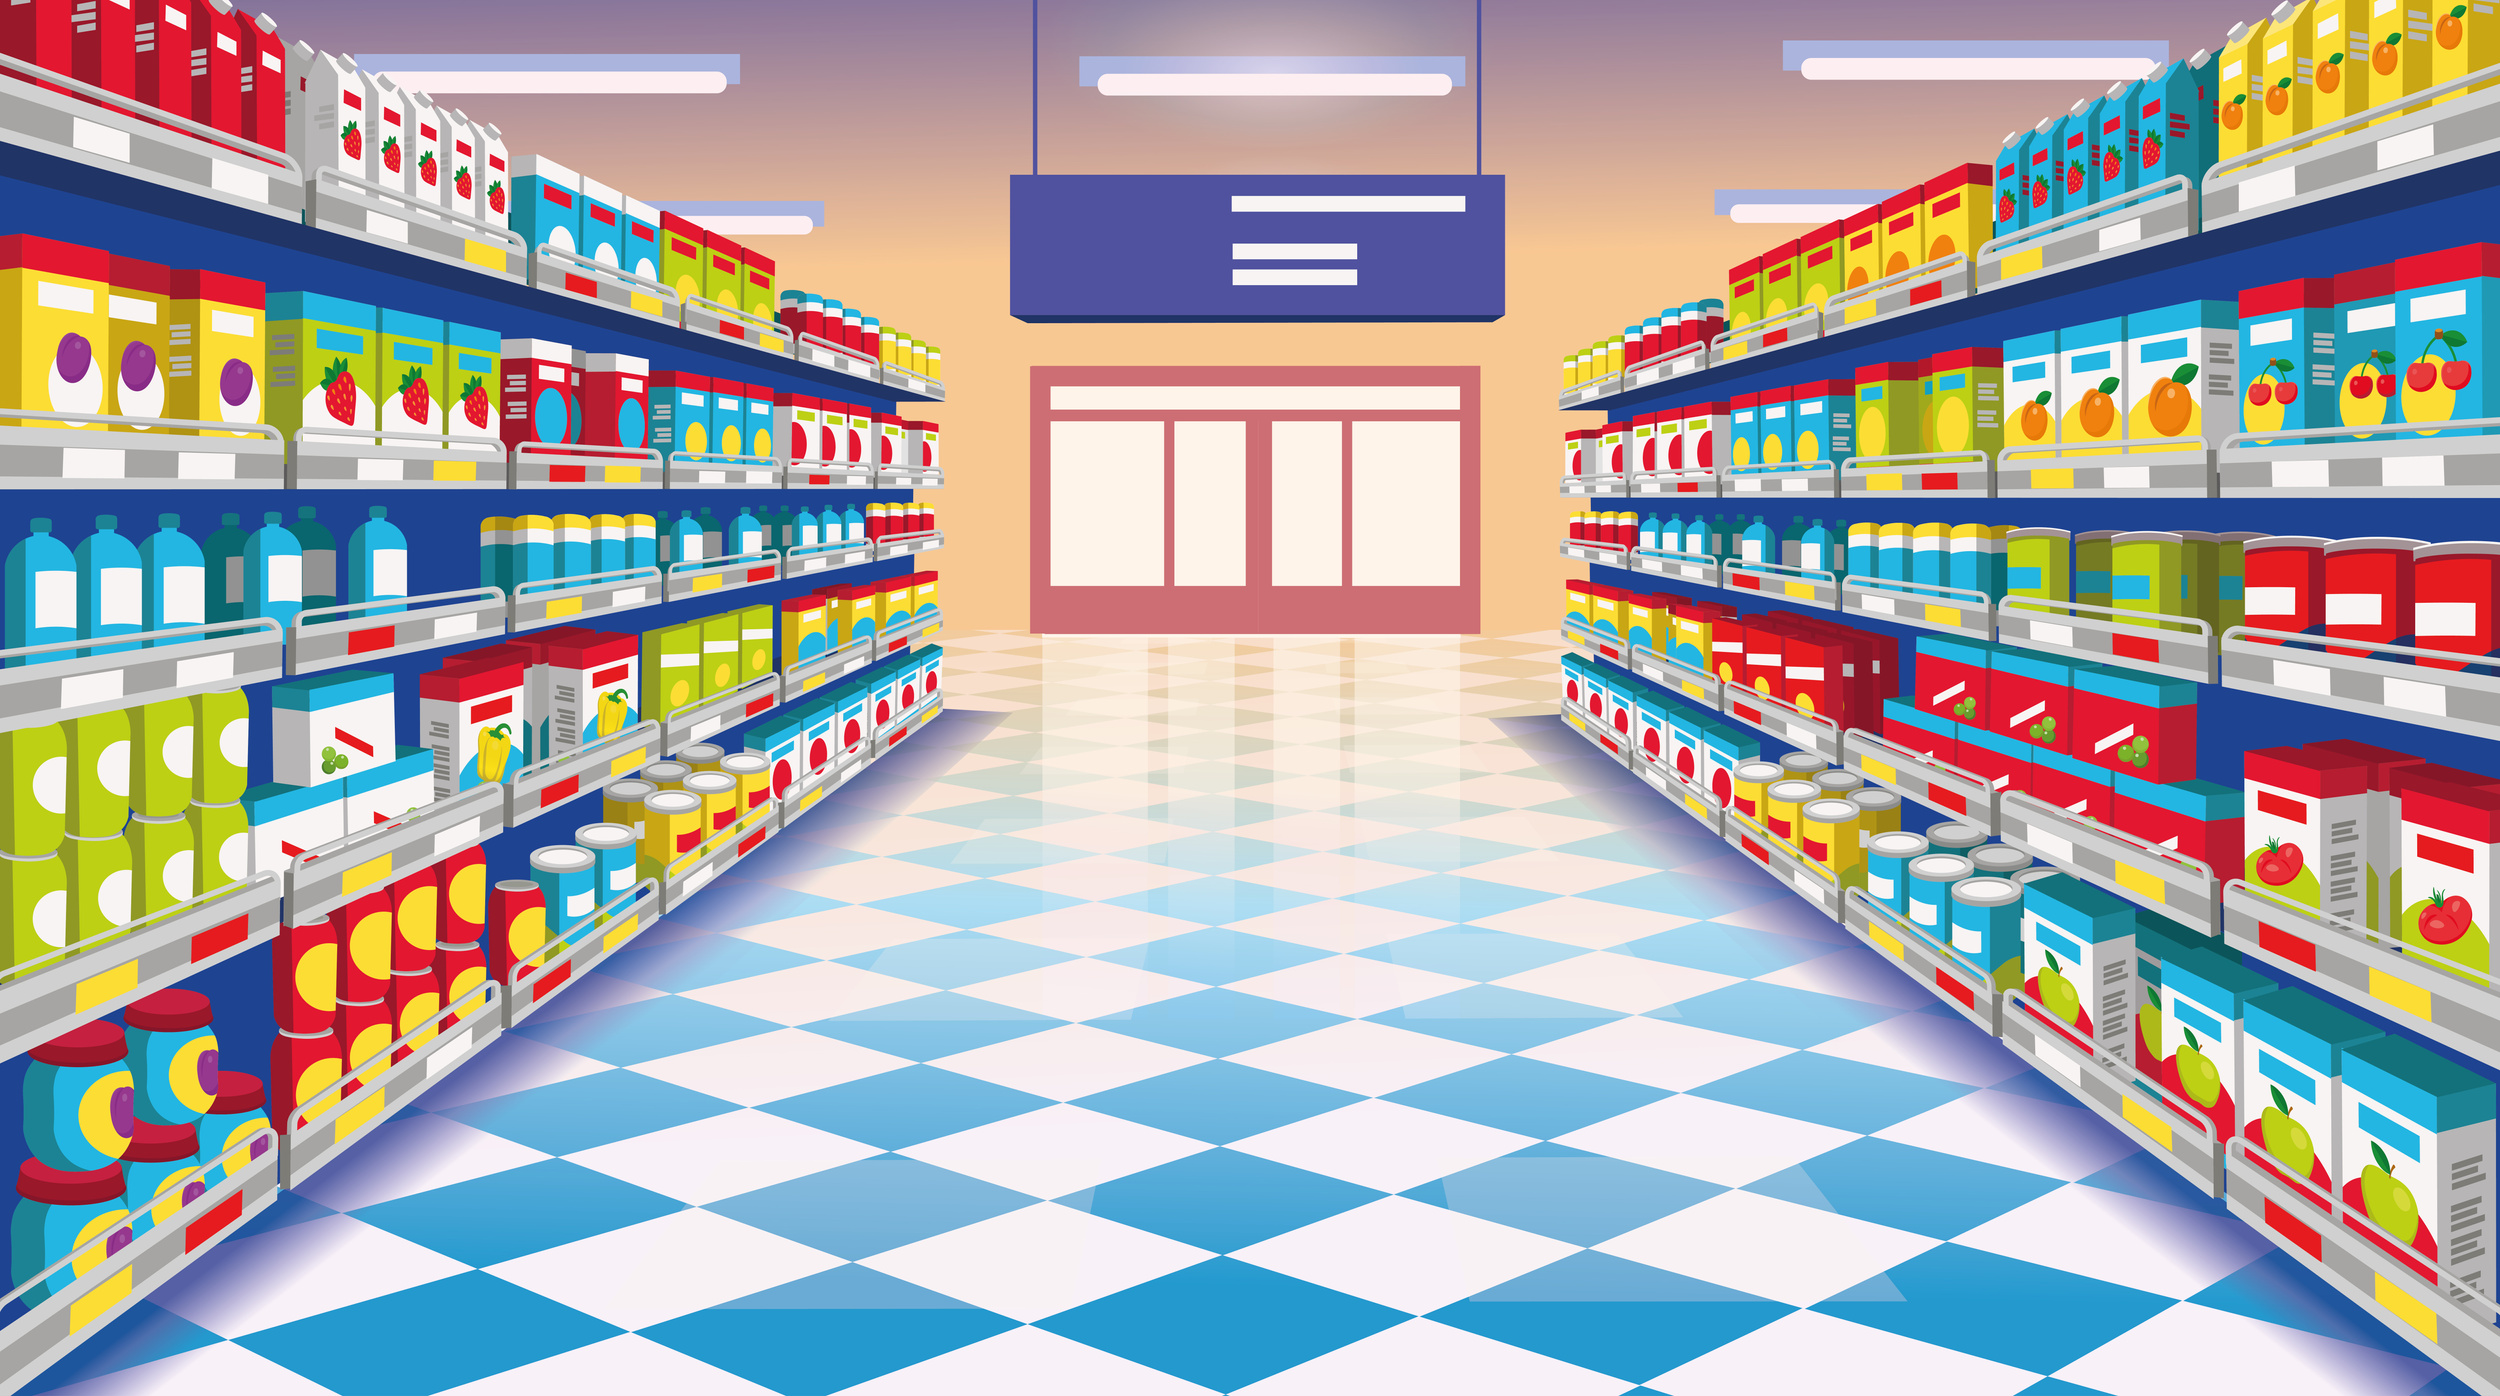 Perspective view of supermarket aisle. Supermarket